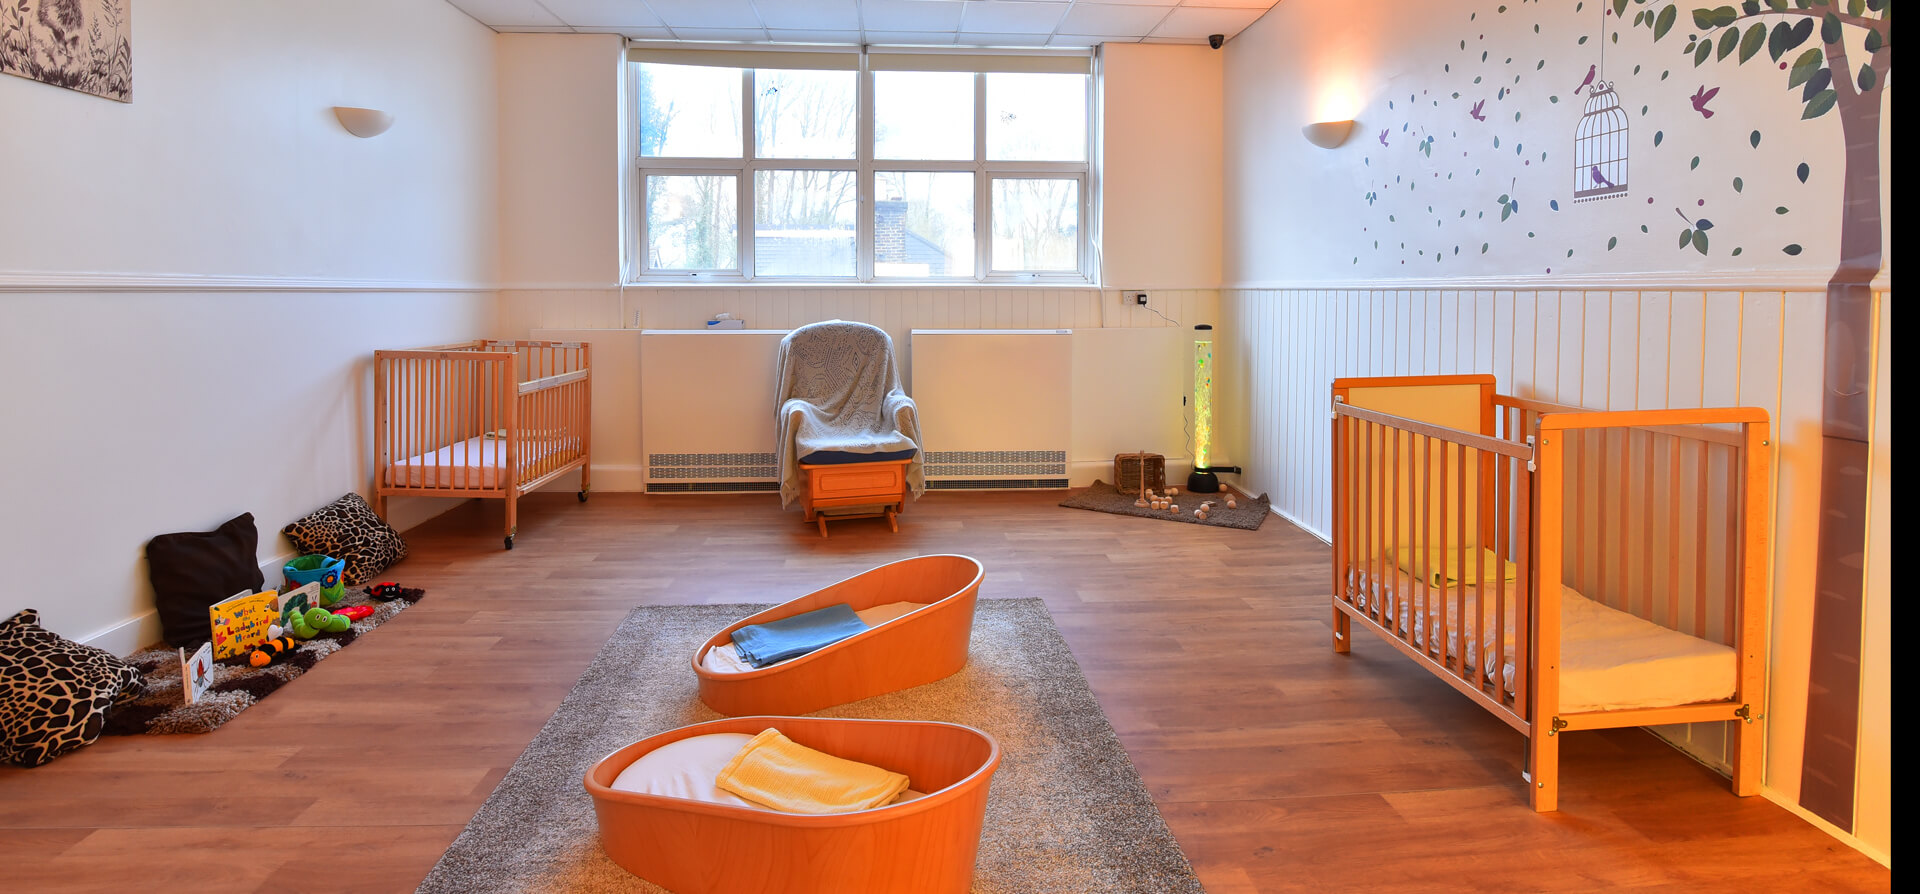 4788 Reigate baby room 